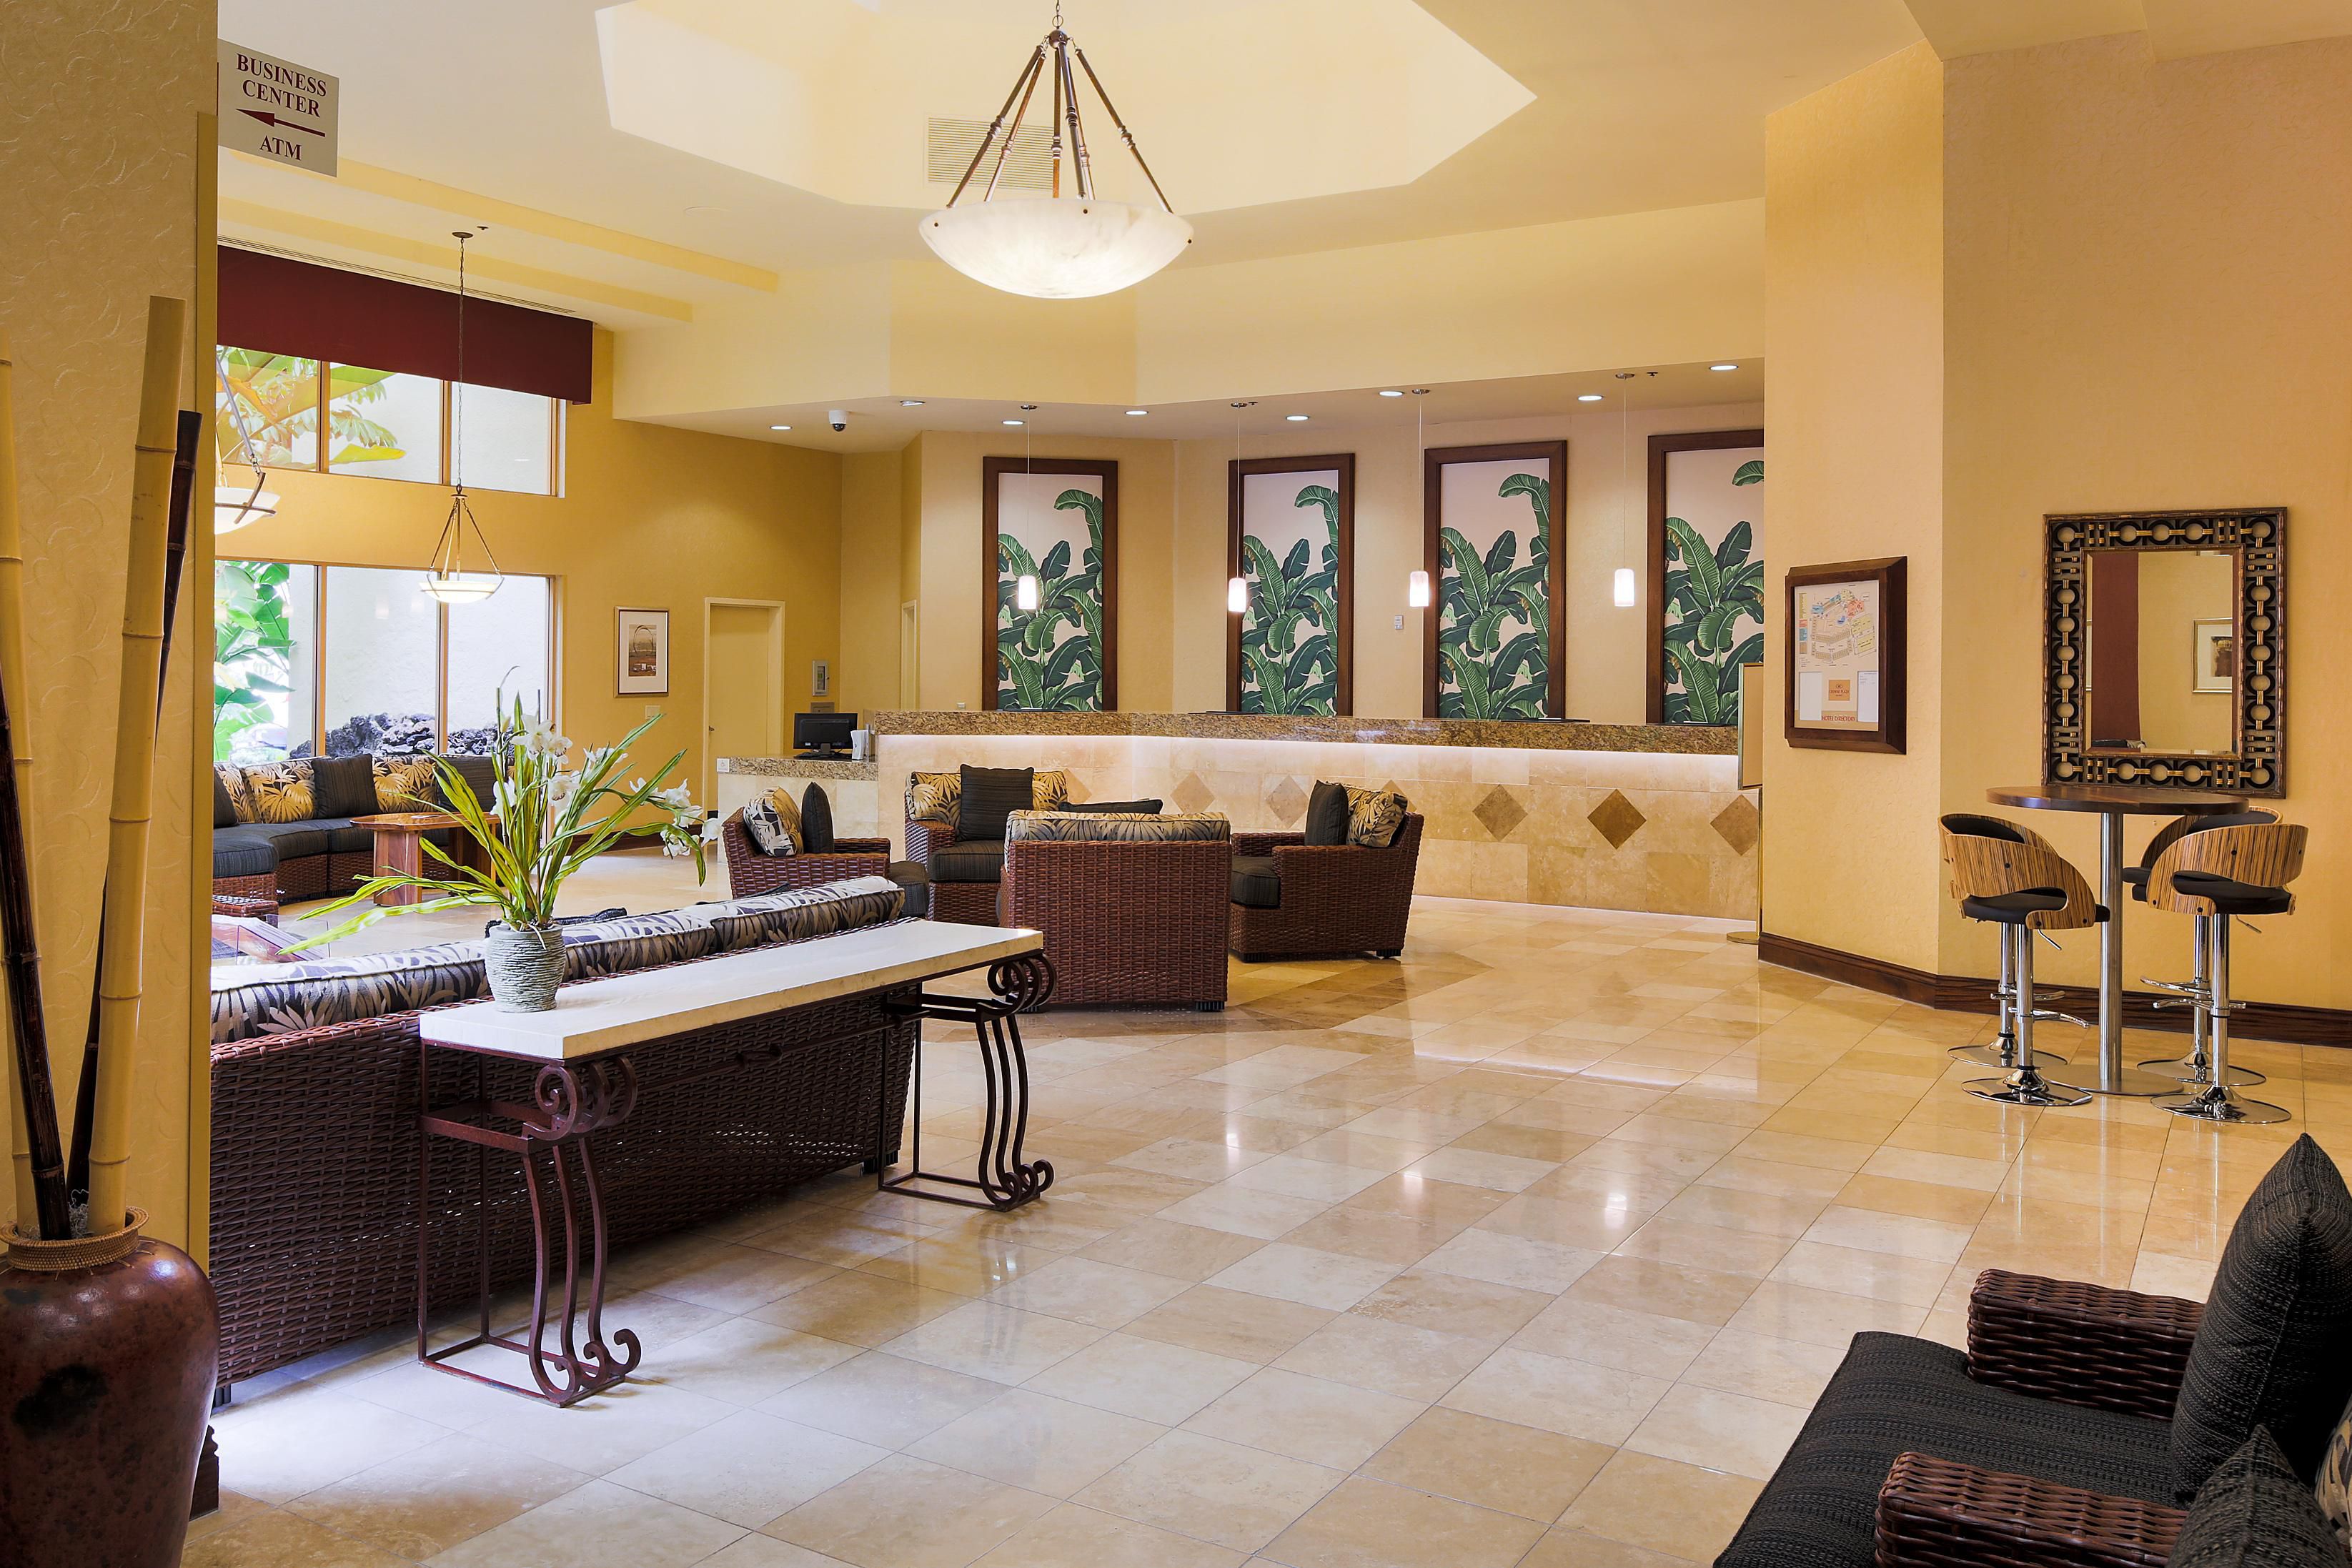 Escape to the comfort of our Lobby